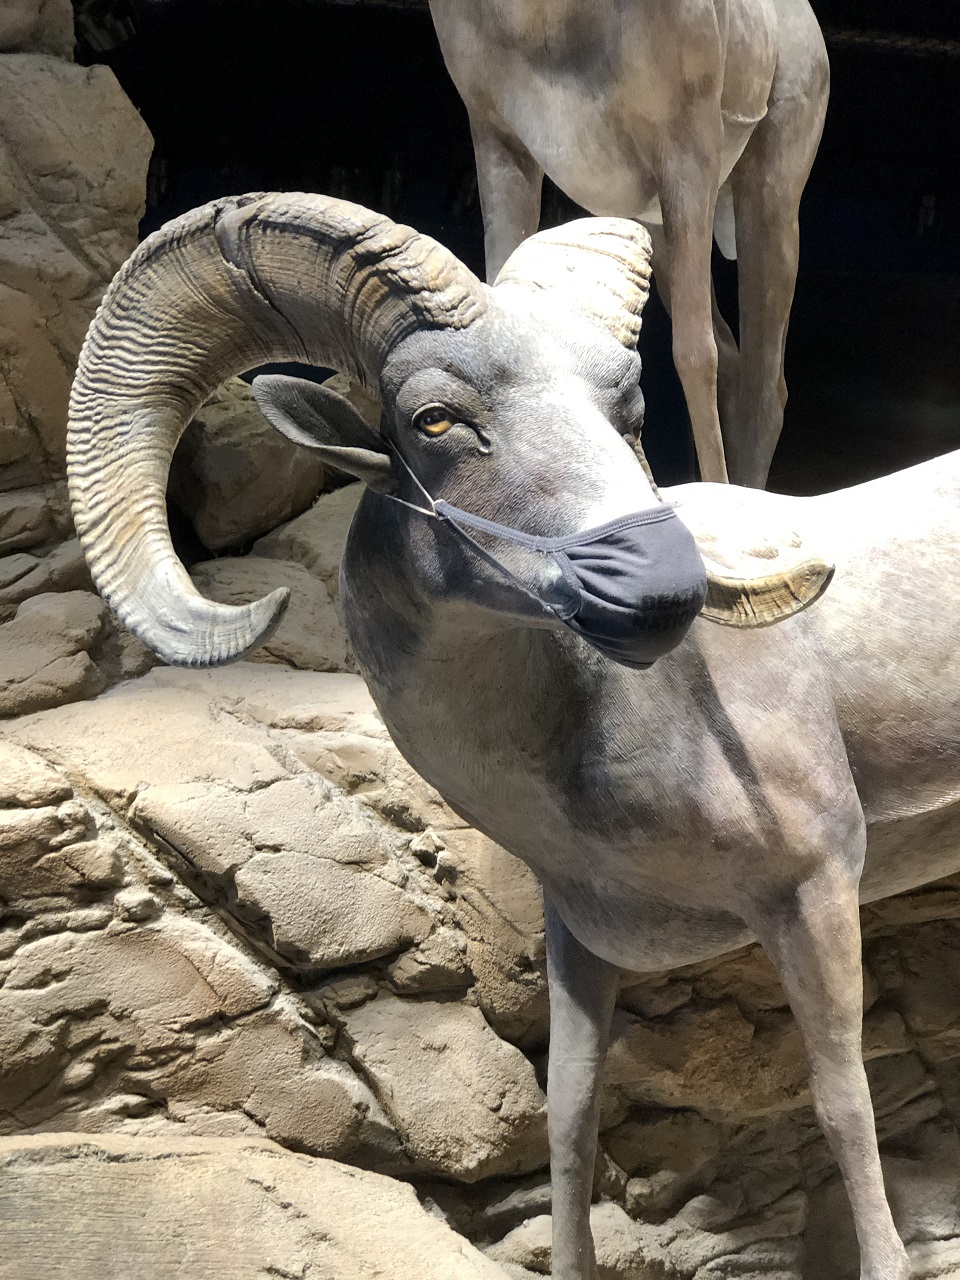 The front half of a bighorn sheep statue is seen, including front legs, head, and curving horns. It is wearing a gray face covering over its nose and mouth.